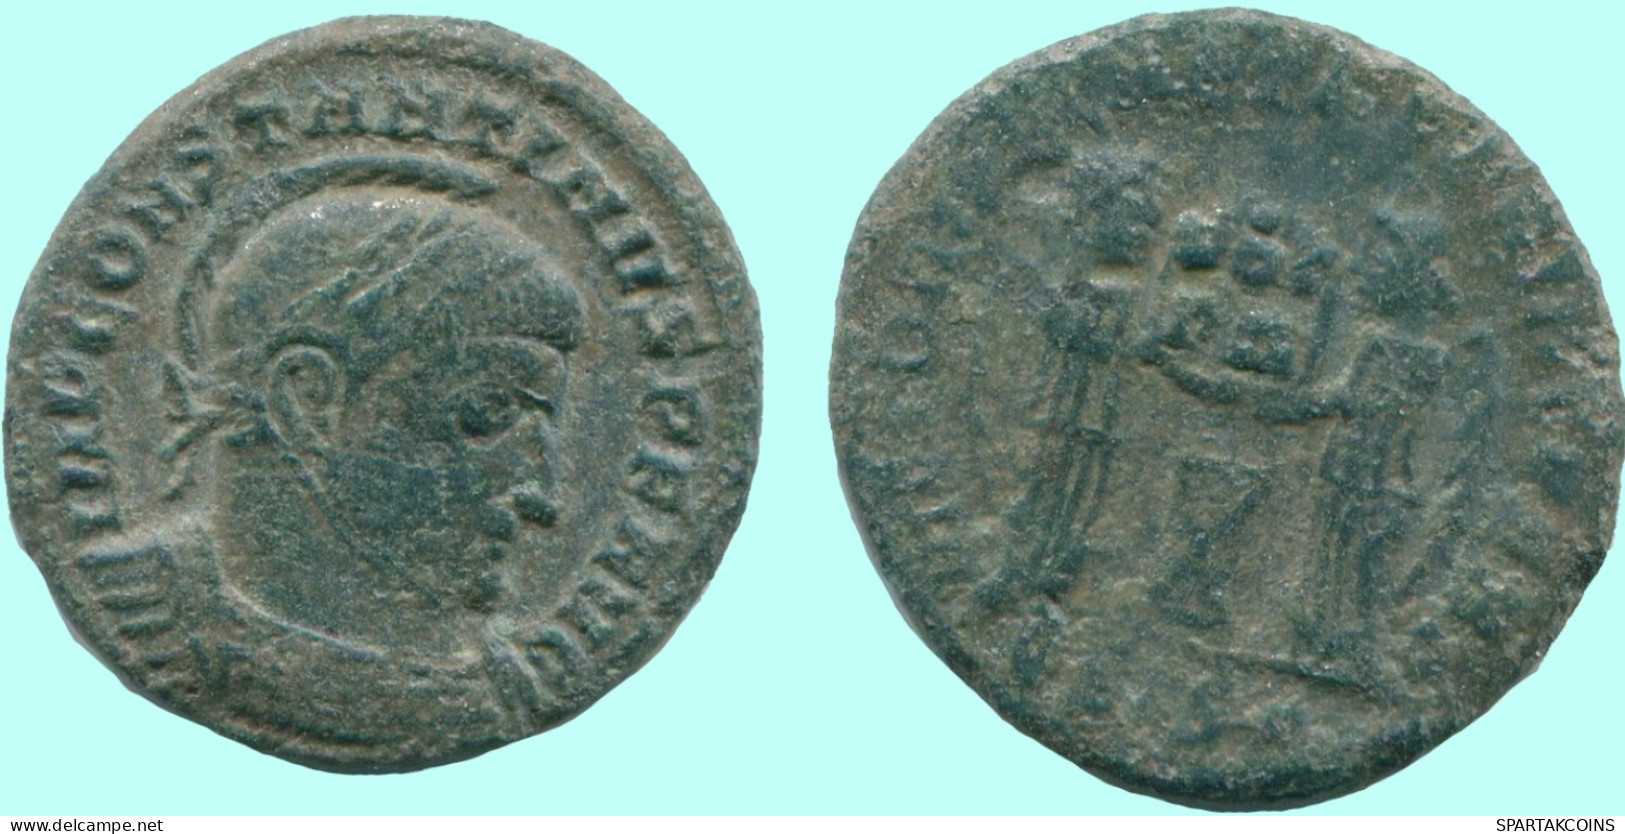 CONSTANTINE I MAGNUS CYZICUS TWO VICTORIES VOT/PR 2.4g/17mm #ANC13086.17.E.A - The Christian Empire (307 AD To 363 AD)